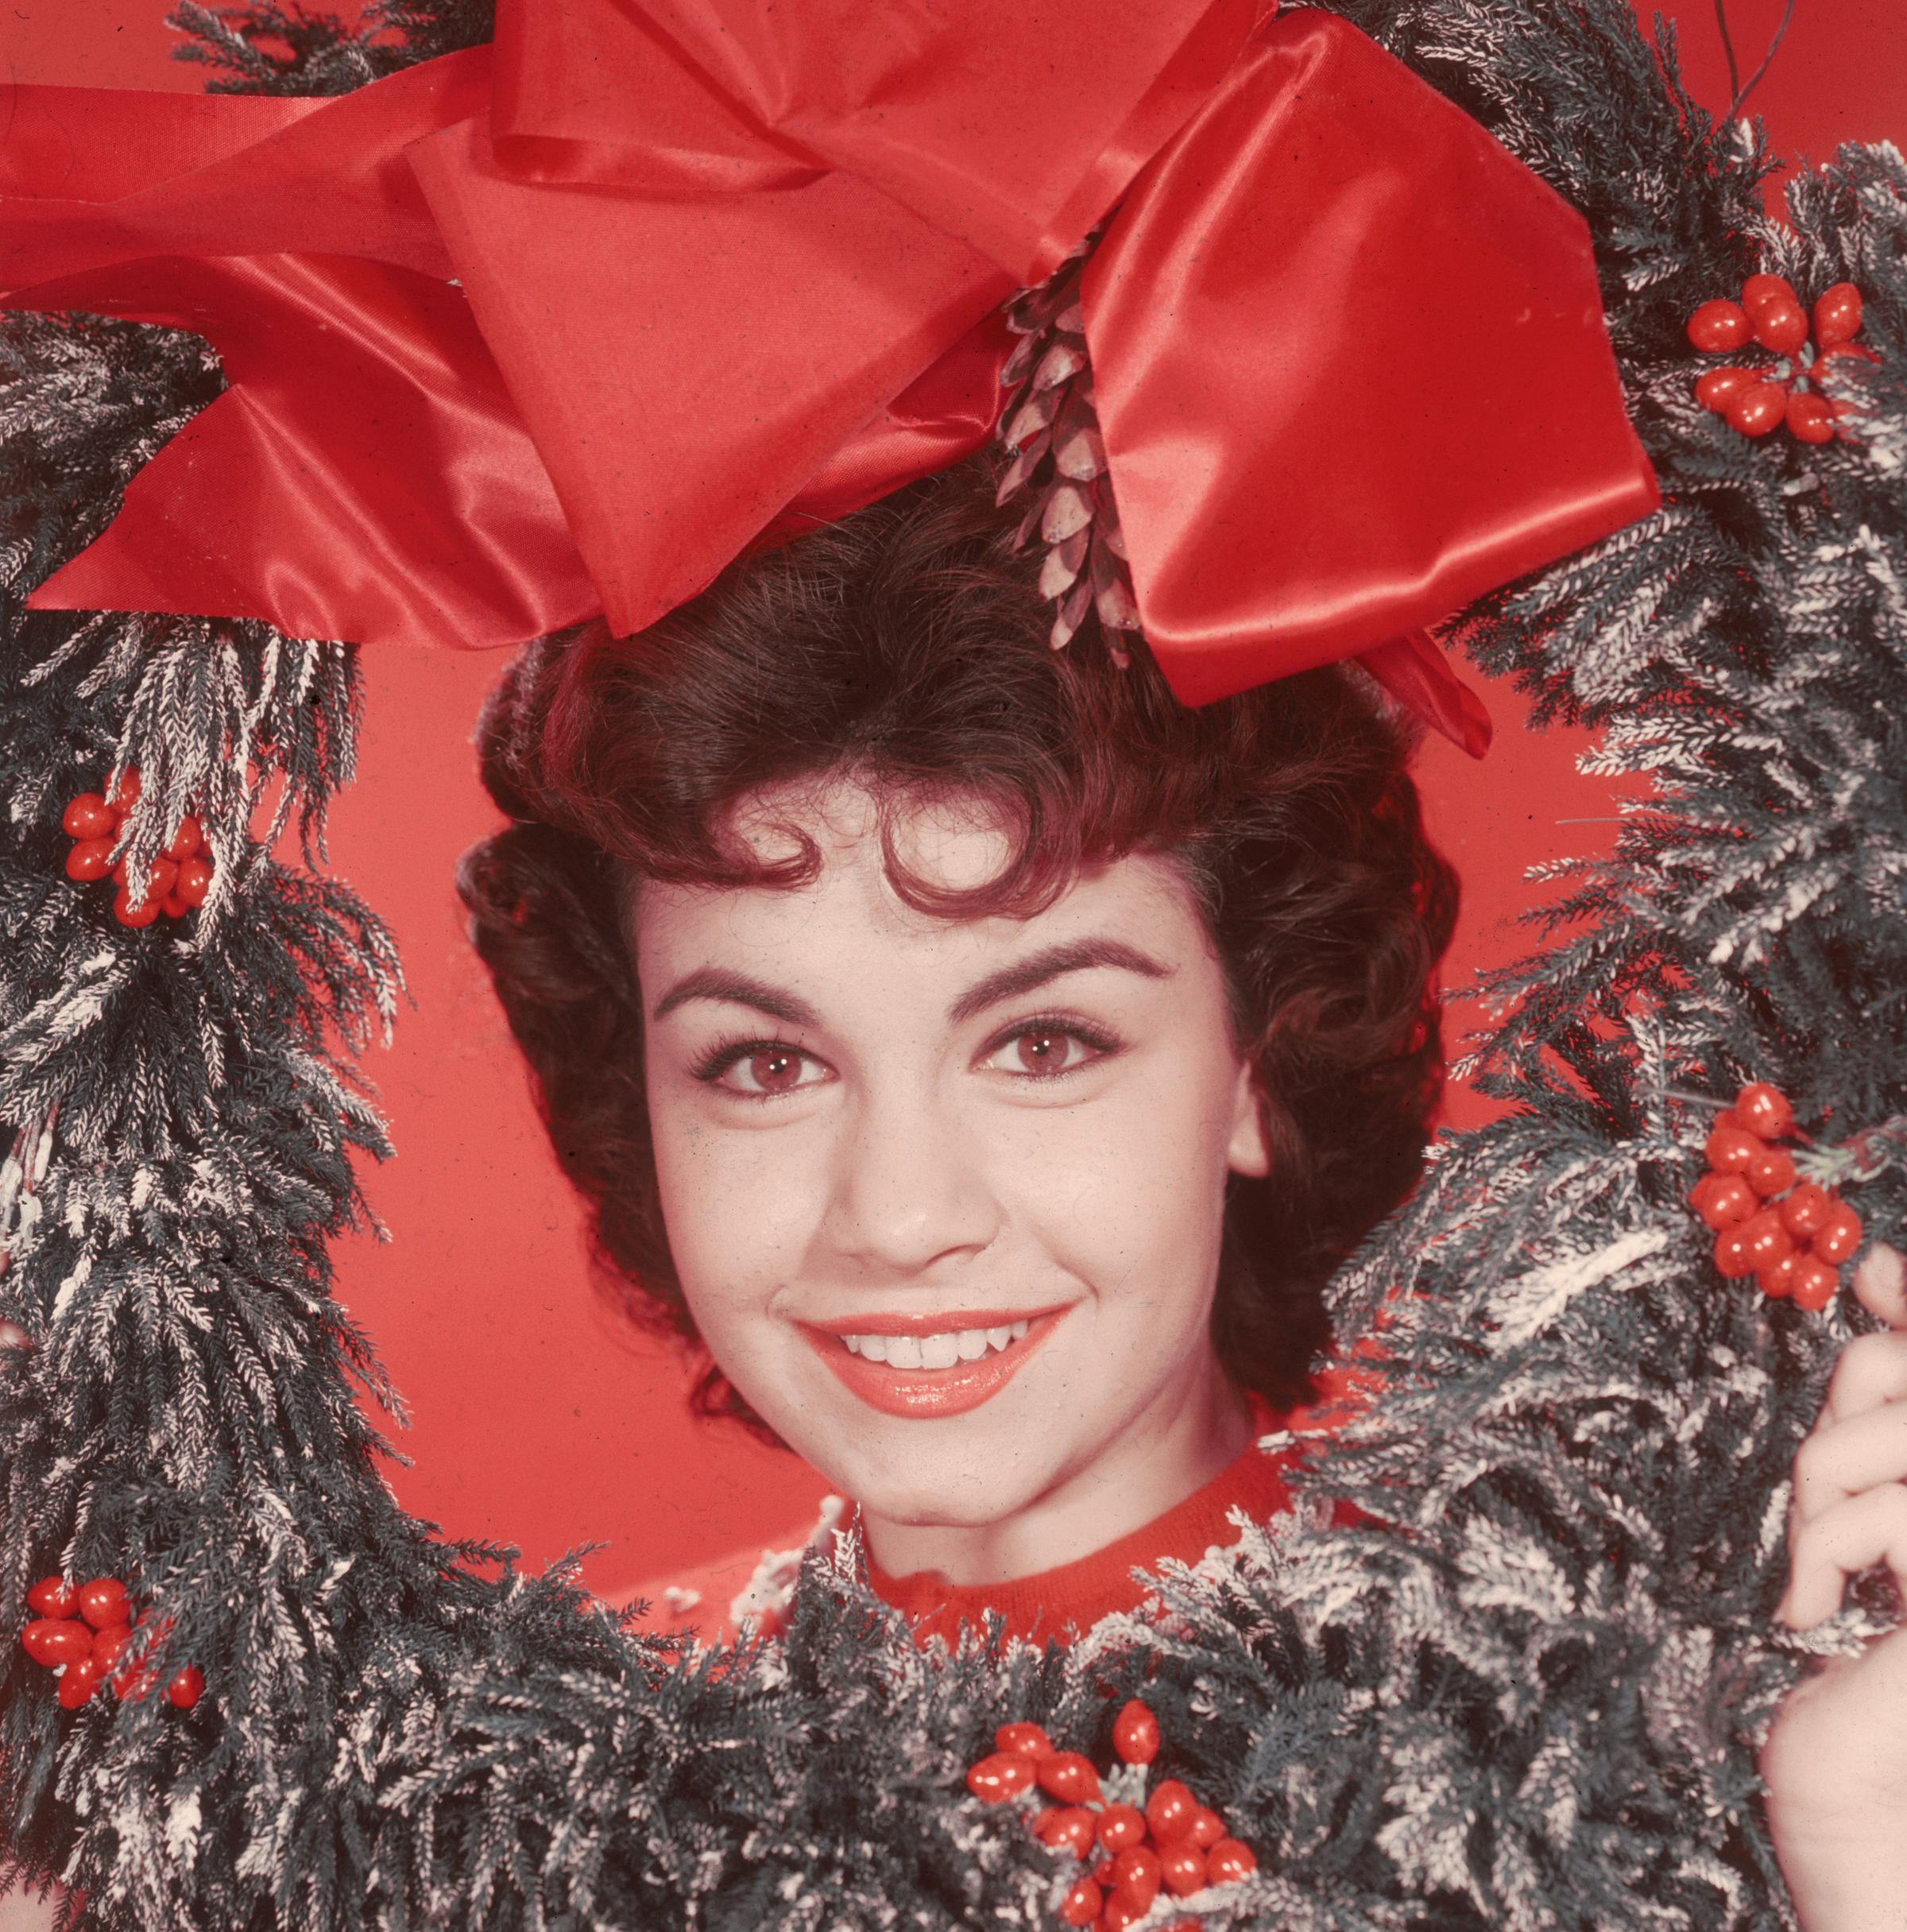 Of annette funicello photos Jack L.